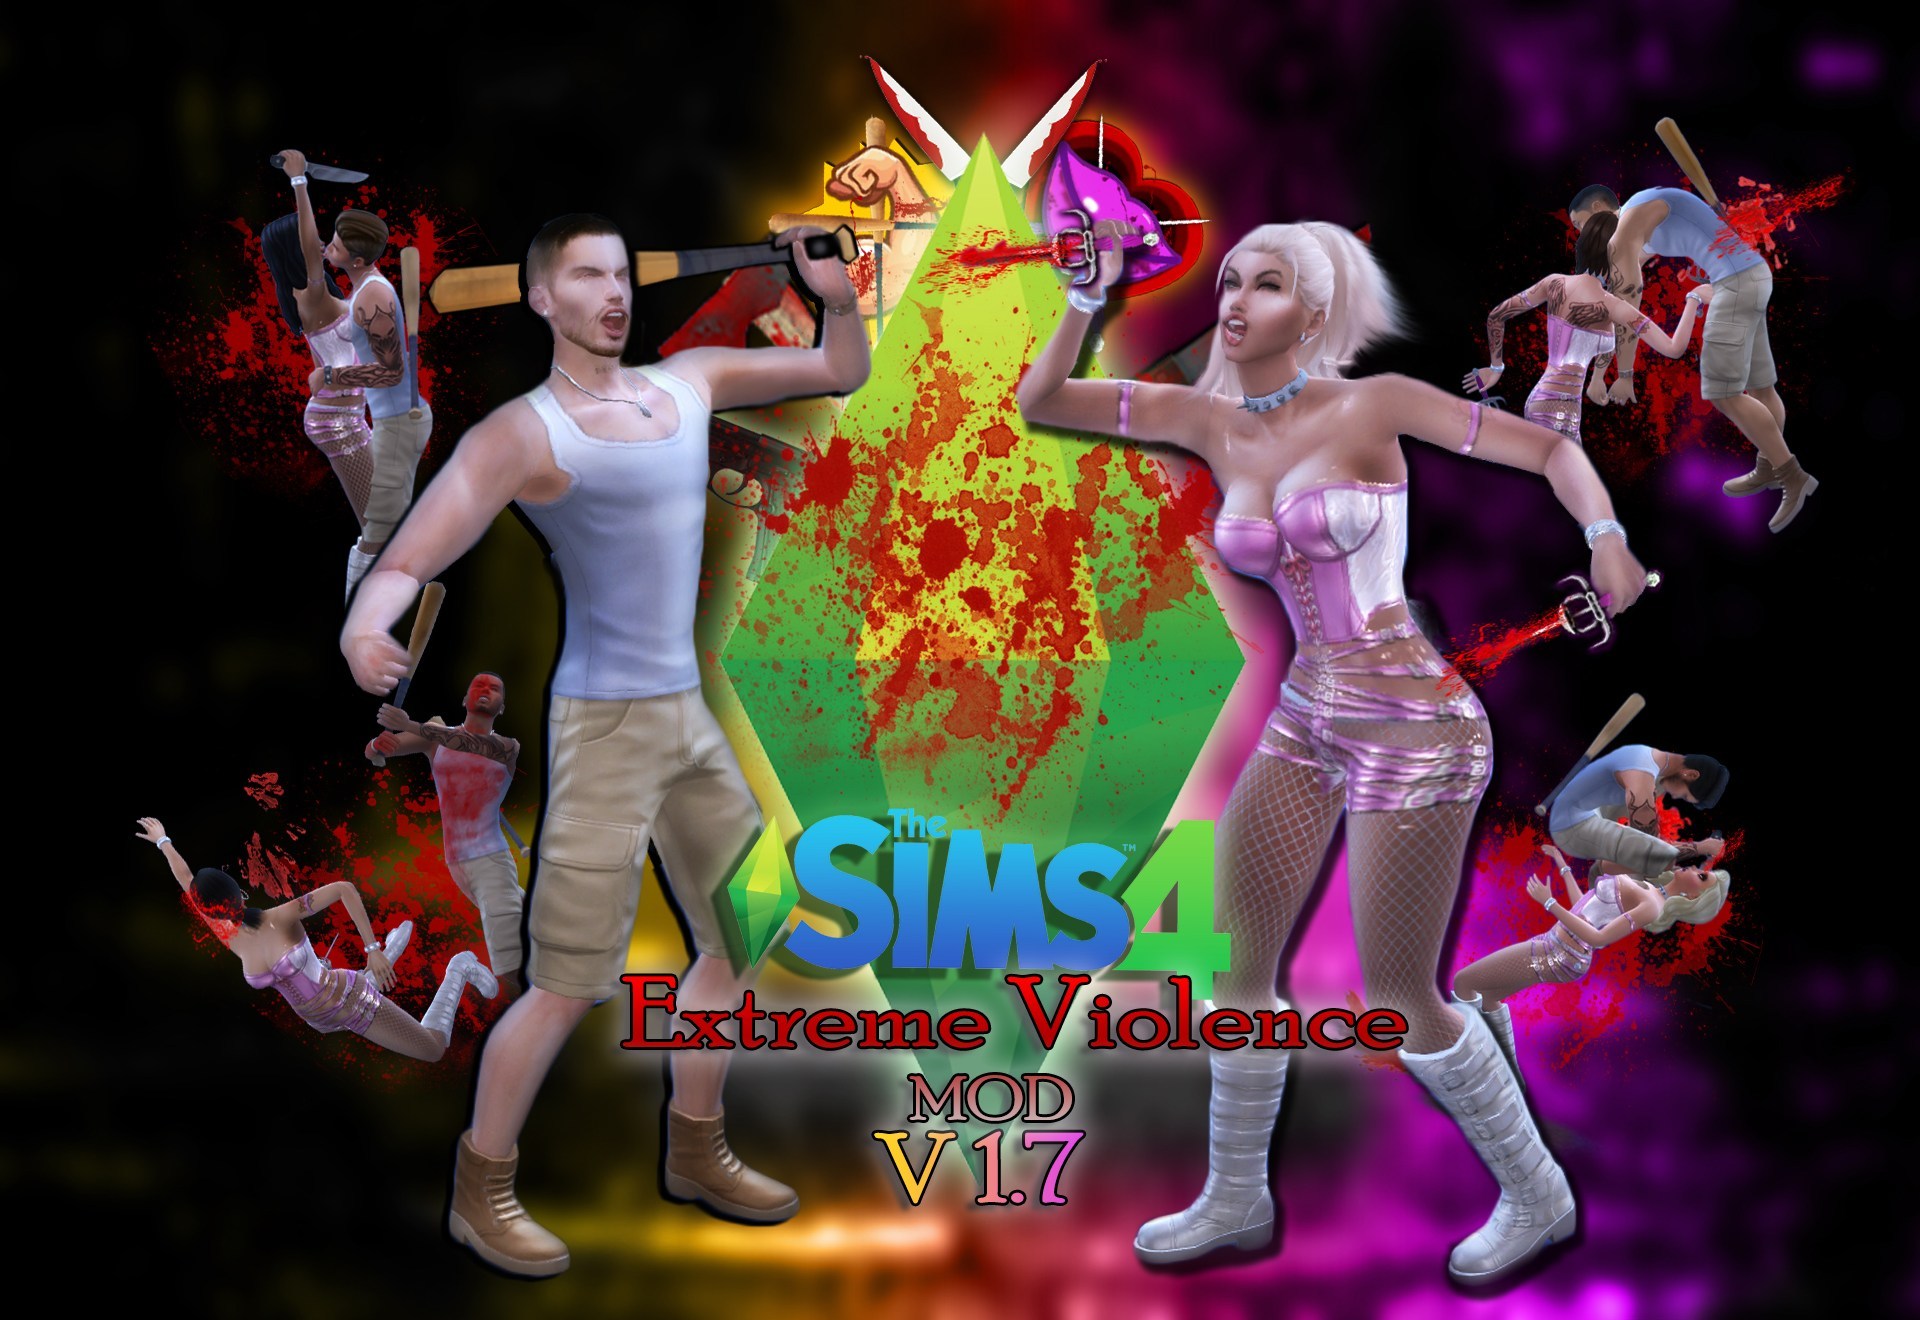 download the sims 4 extreme violence mod